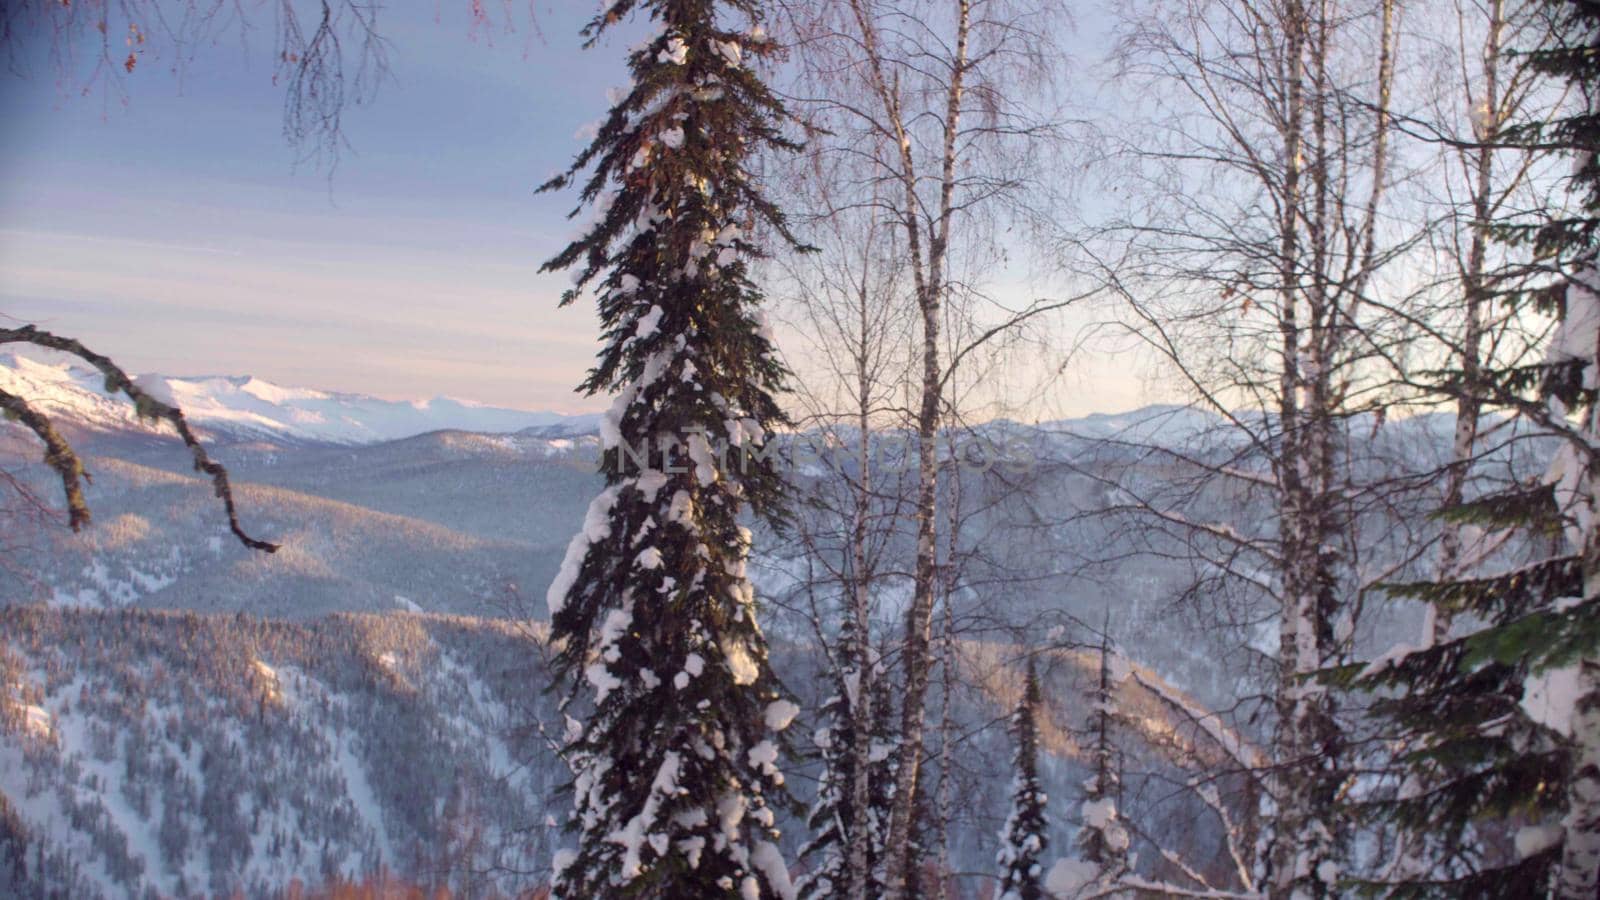 View of the winter forest in the Siberian mountains by Chudakov